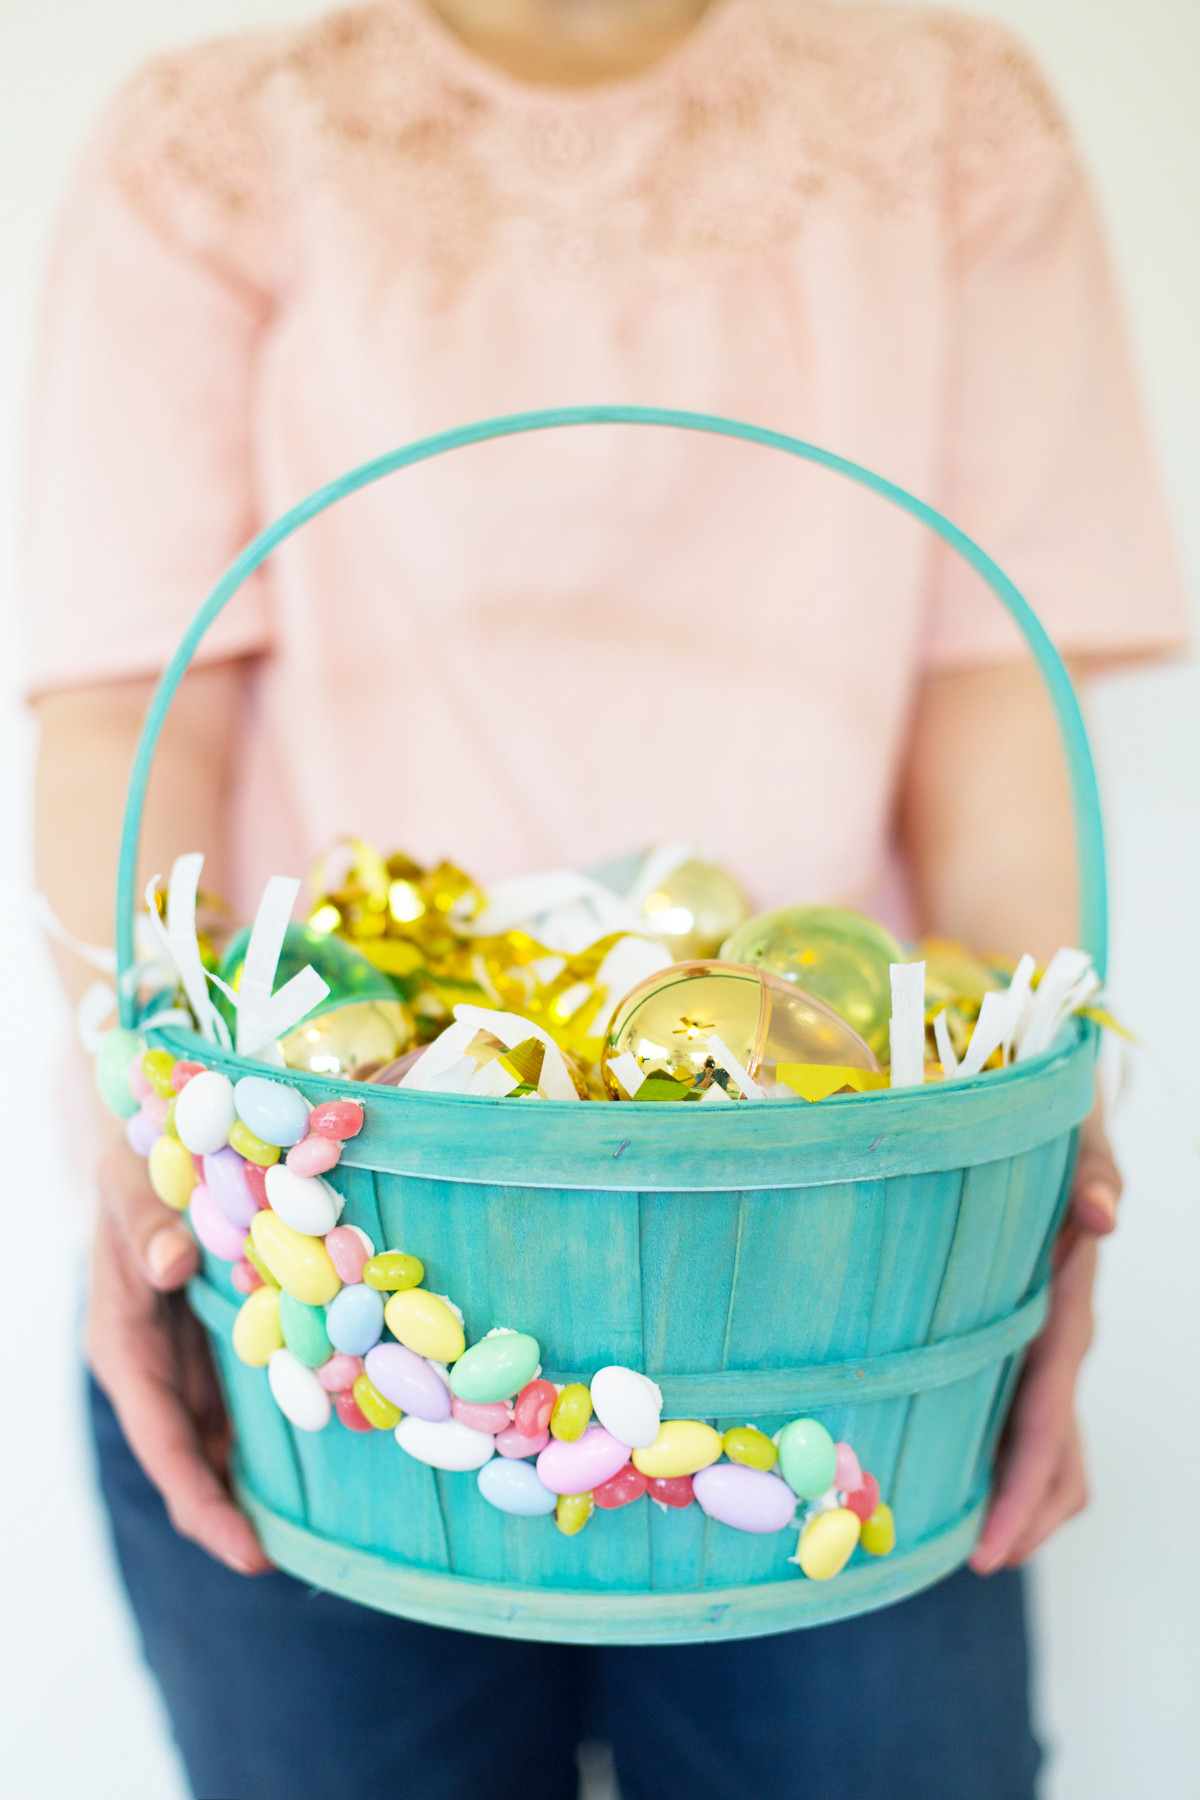 Edible Arrangements Easter Gifts
 Clever Ways to Decorate Your Easter Baskets 2 of 3